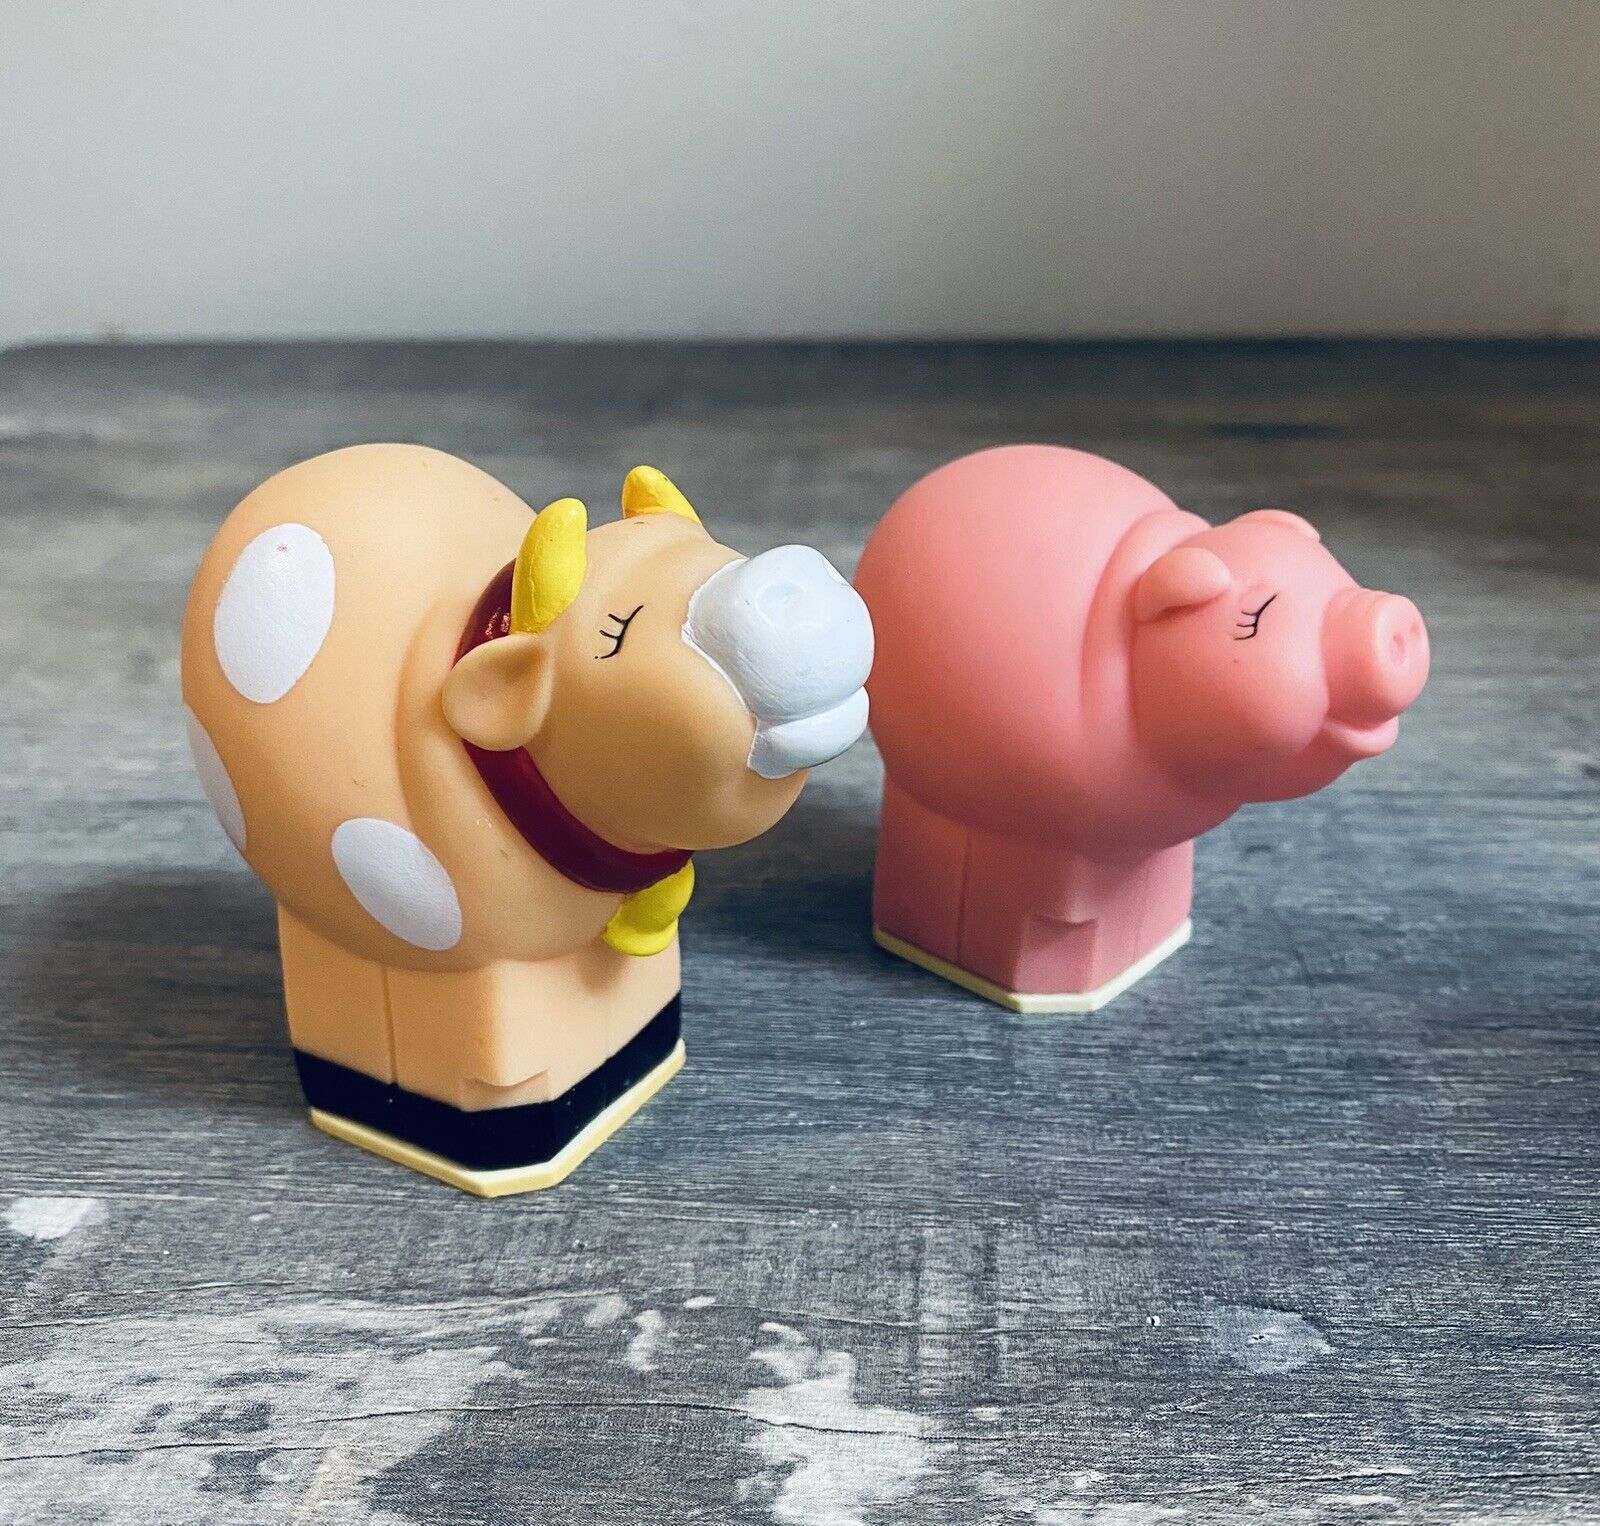 2 Farm Animal Replacement Pieces Pig And Cow Vinyl